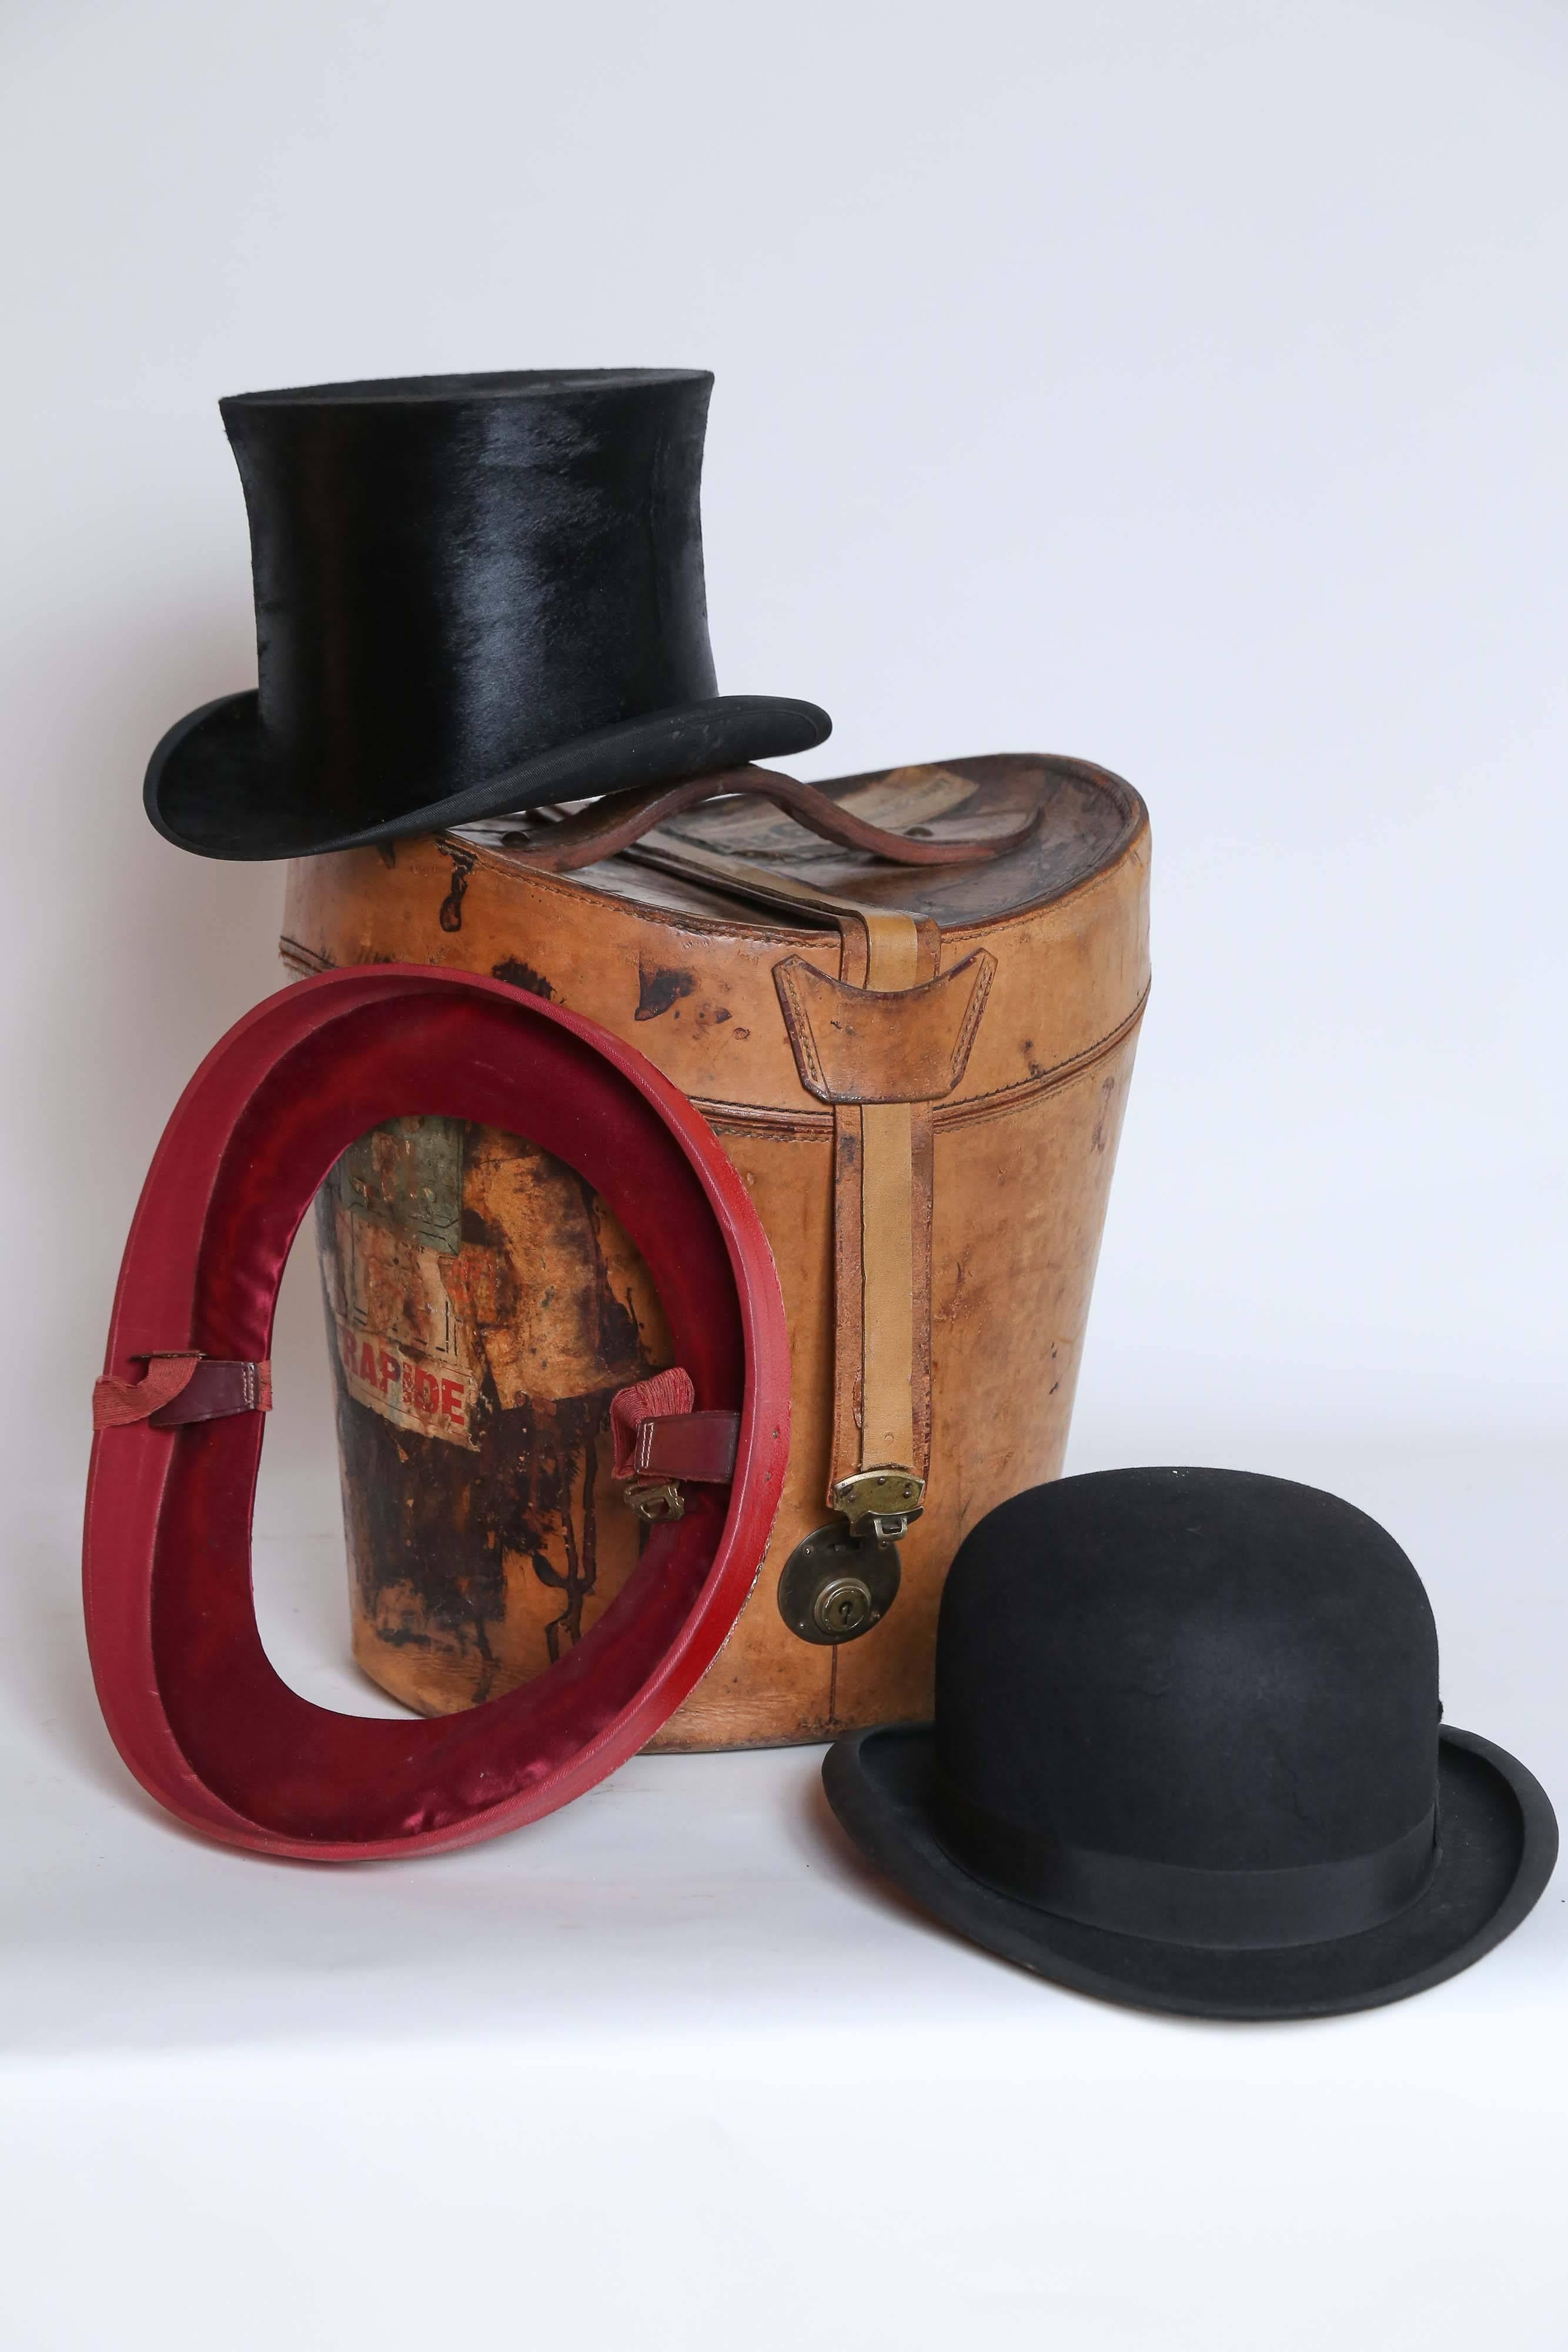 From France, a leather hat box containing a top hat and a bowler. The Top Hat is marked Renard Leriche, Paris, 1900 and is in wonderful condition. The bowler is newer and marked Madelios, Paris but it does have a crack in the crown. The box, lined